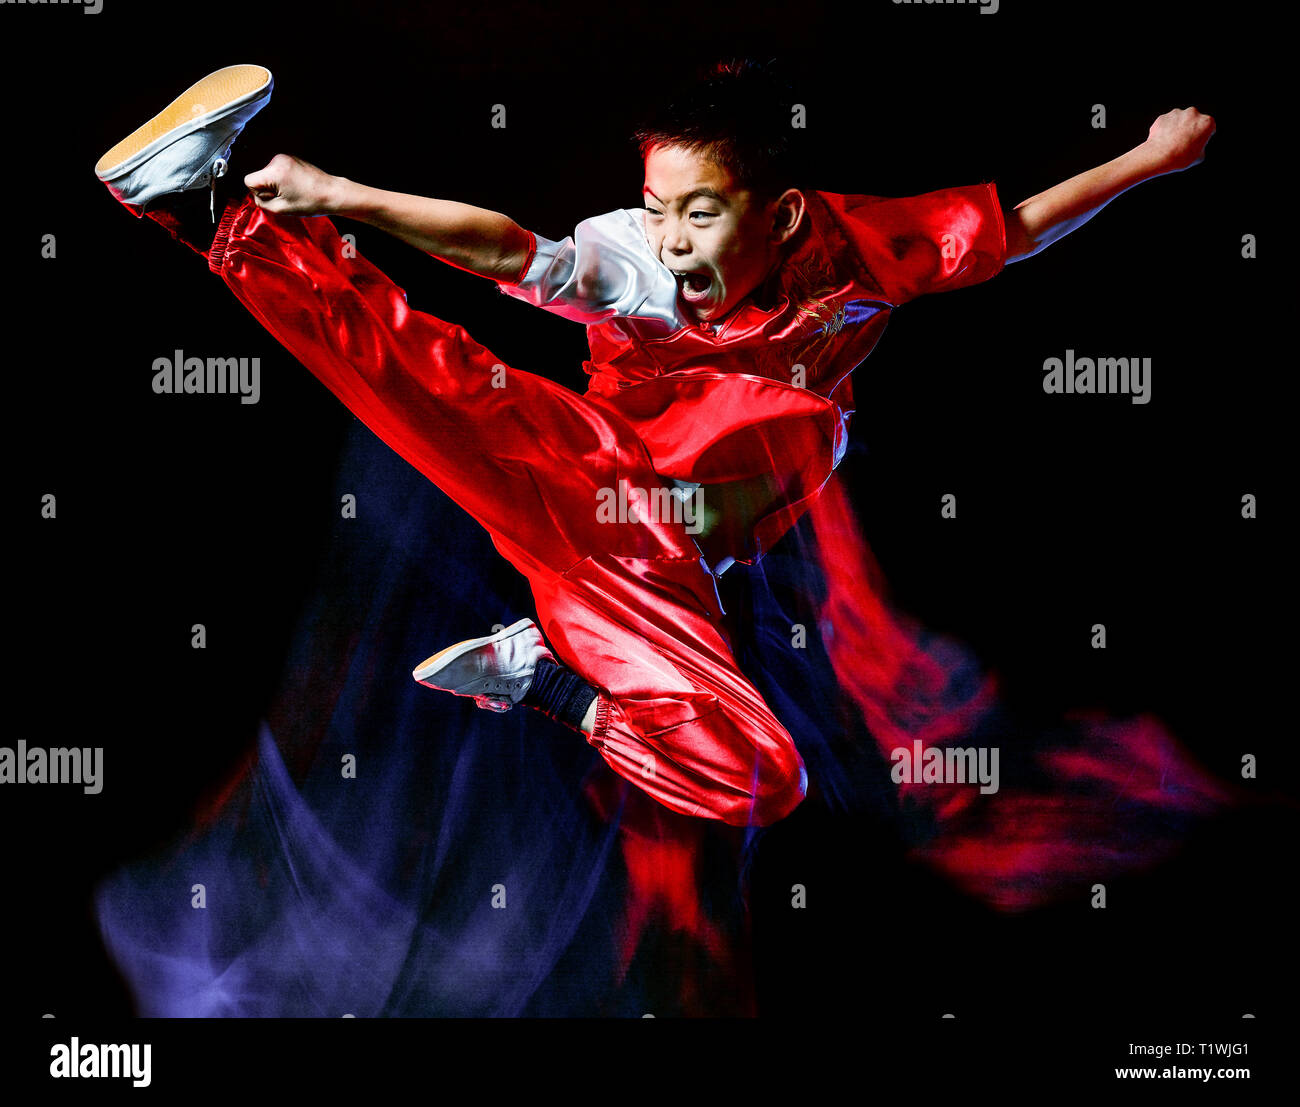 wushu chinese boxing kung fu Hung Gar fighter isolated child isolated on black background with speed light painting effect motion blur Stock Photo